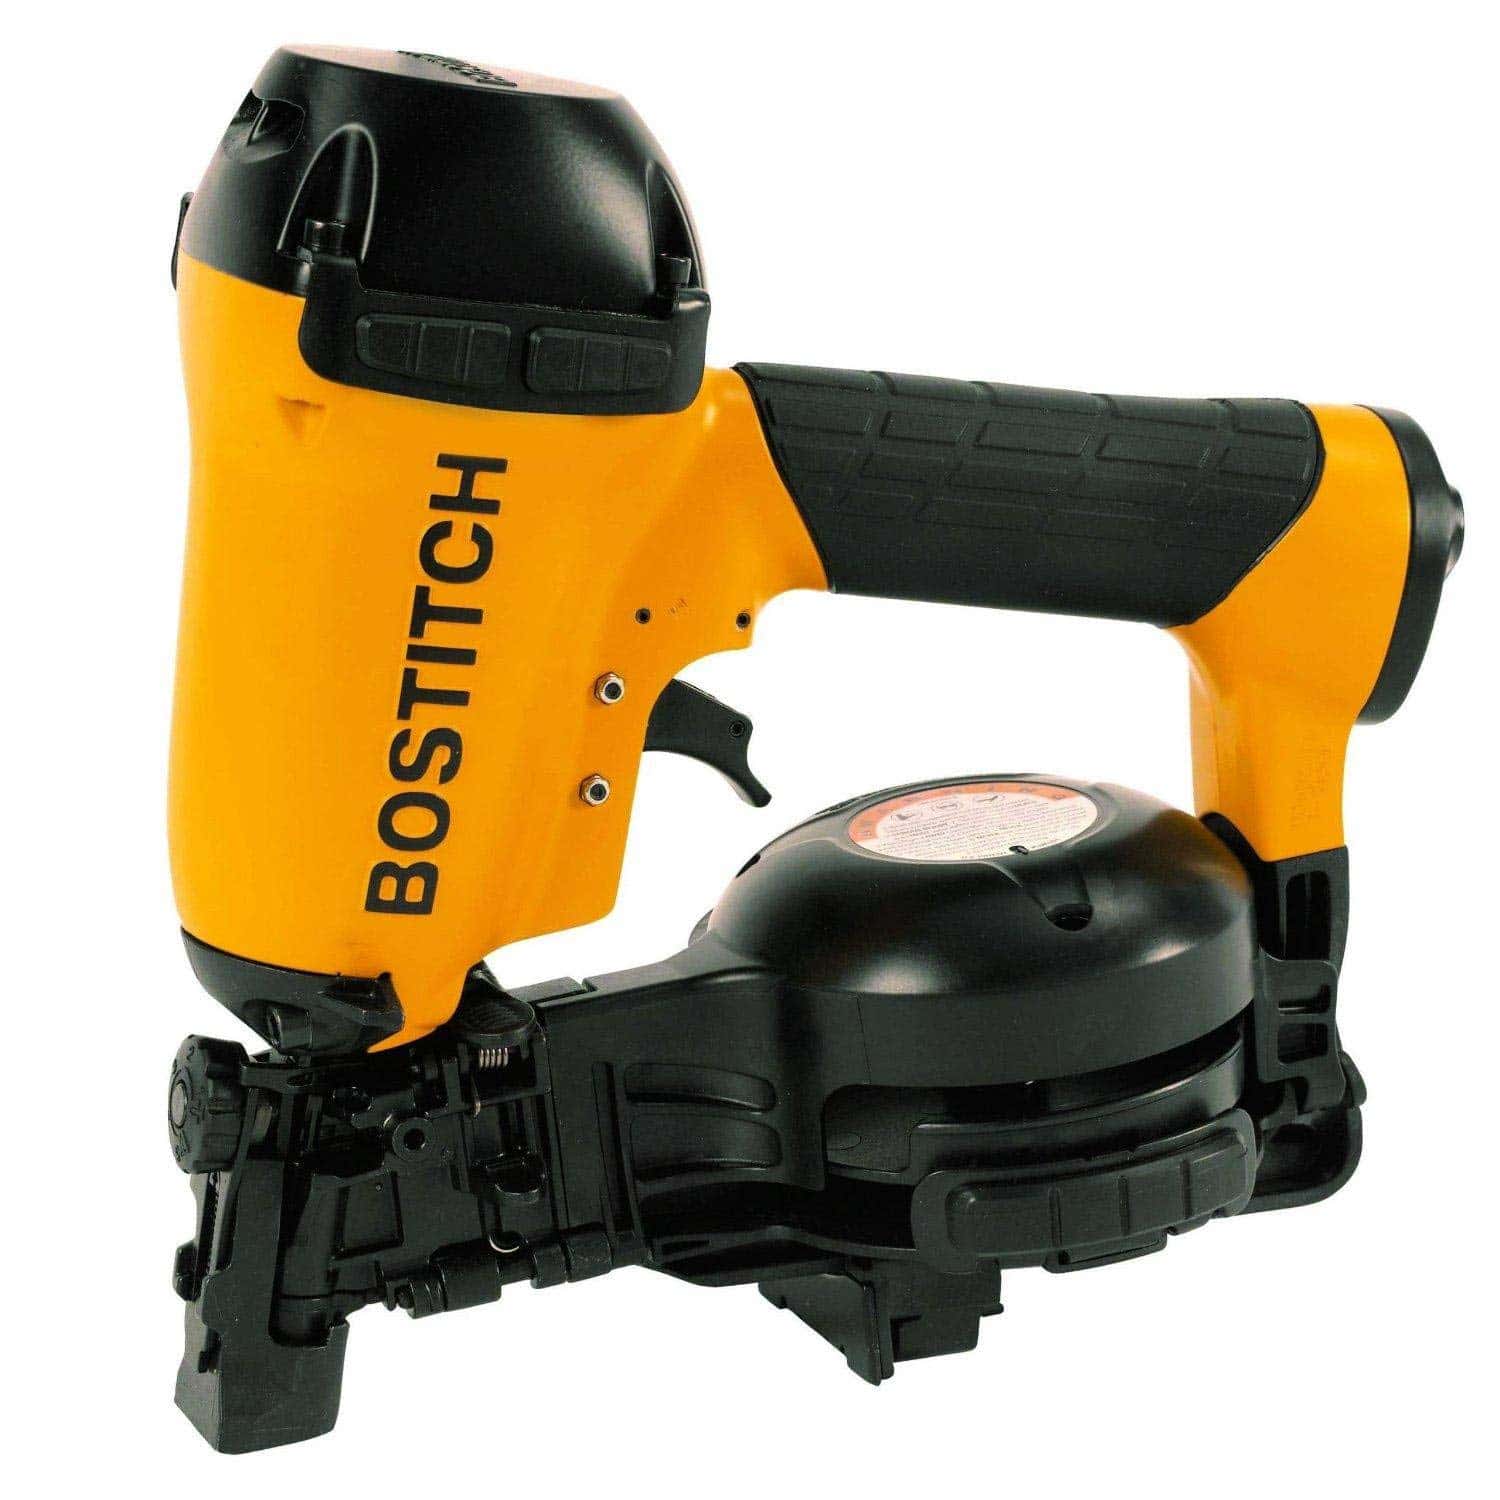 Bositich Roofing Nailer RN46